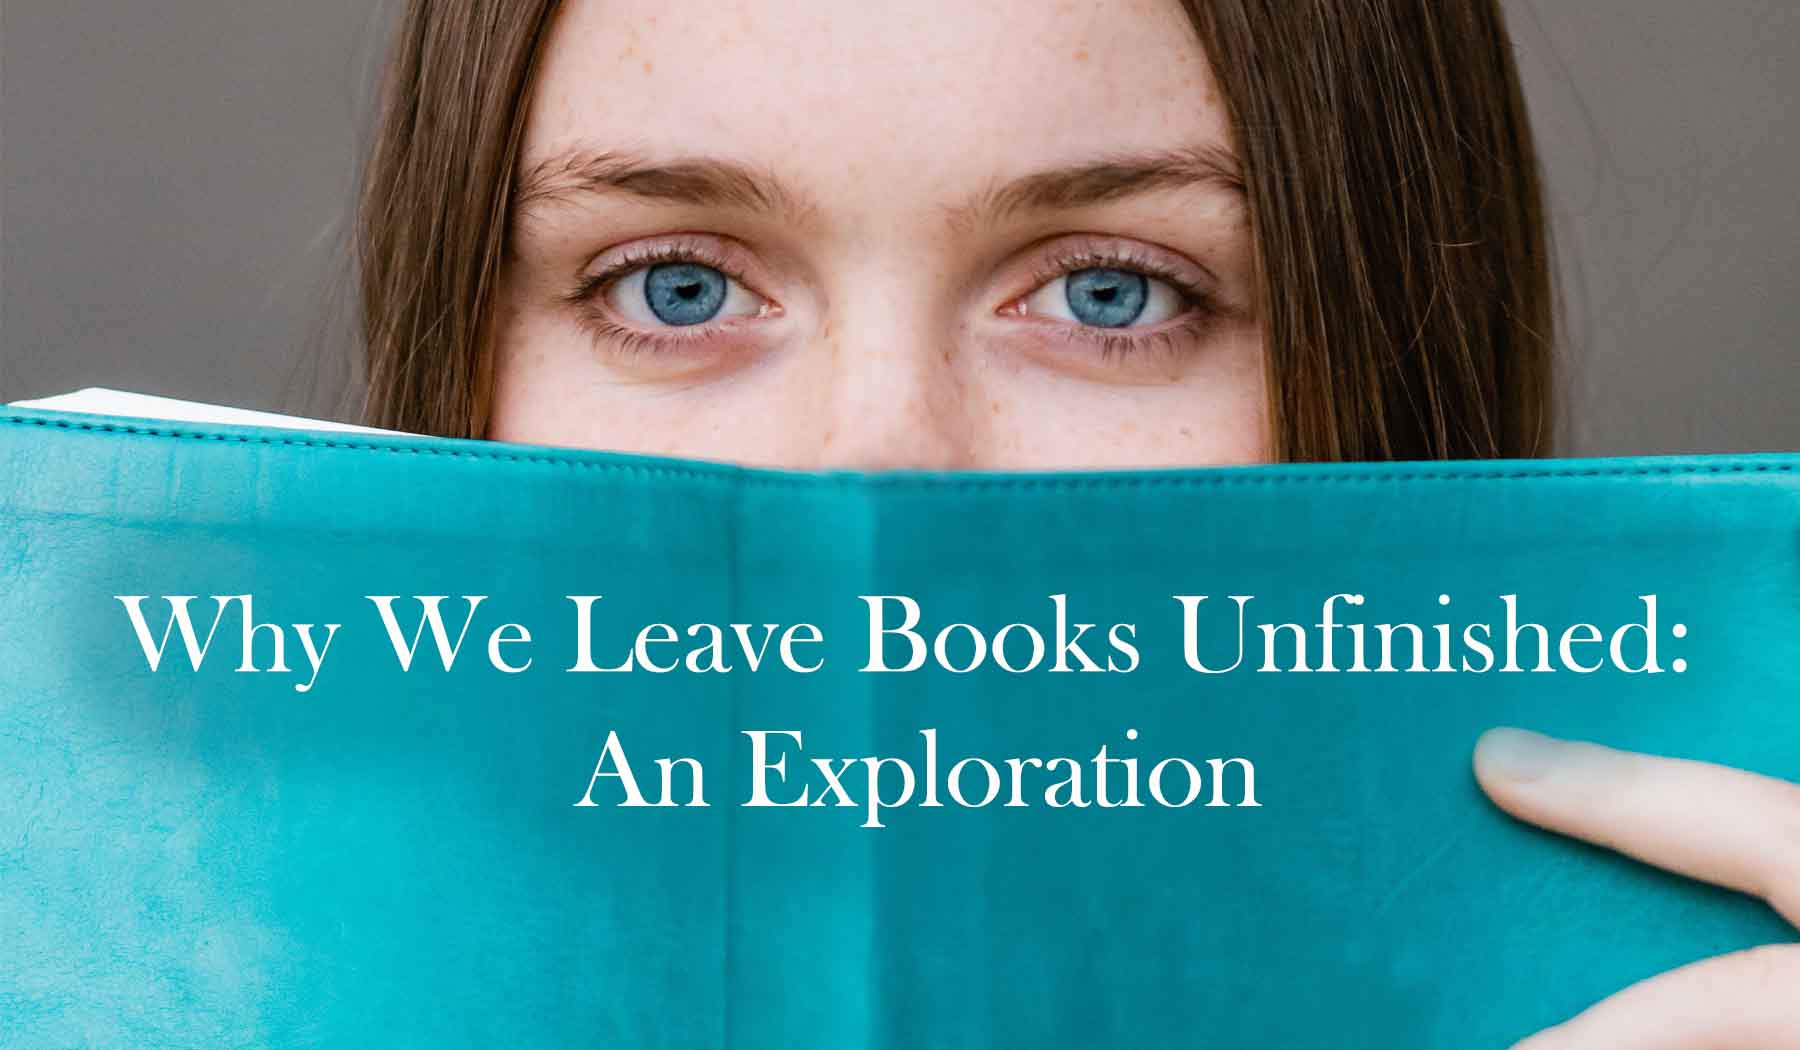 Why We Leave Books Unfinished